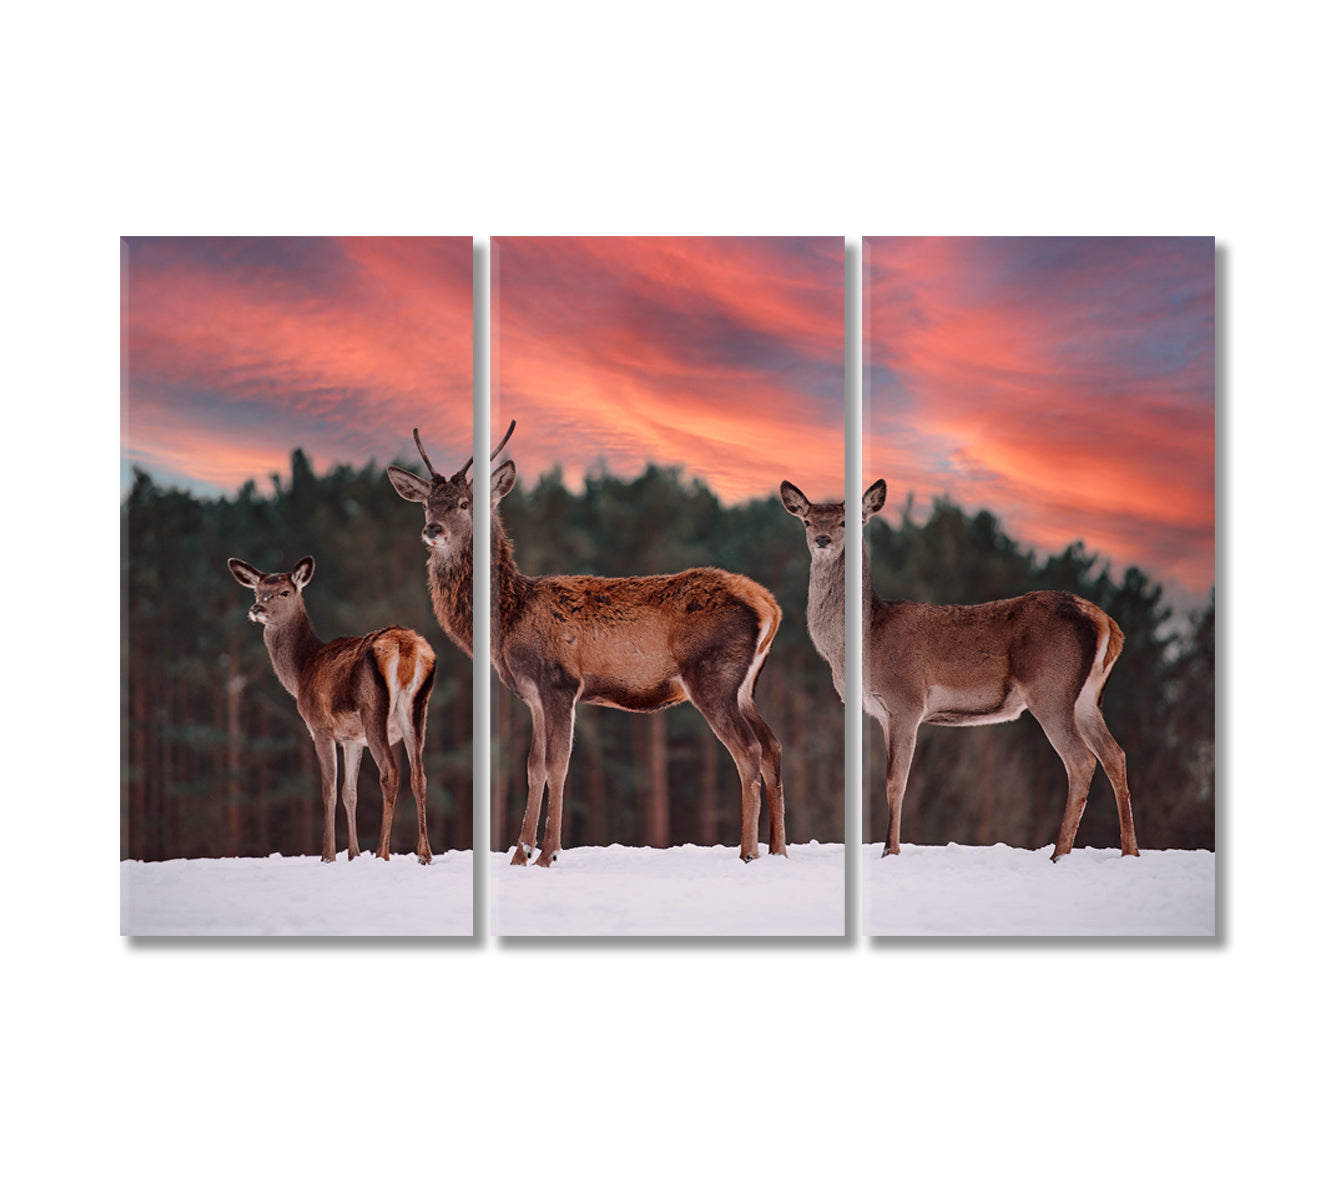 Deer in Winter Forest Canvas Print-Canvas Print-CetArt-3 Panels-36x24 inches-CetArt